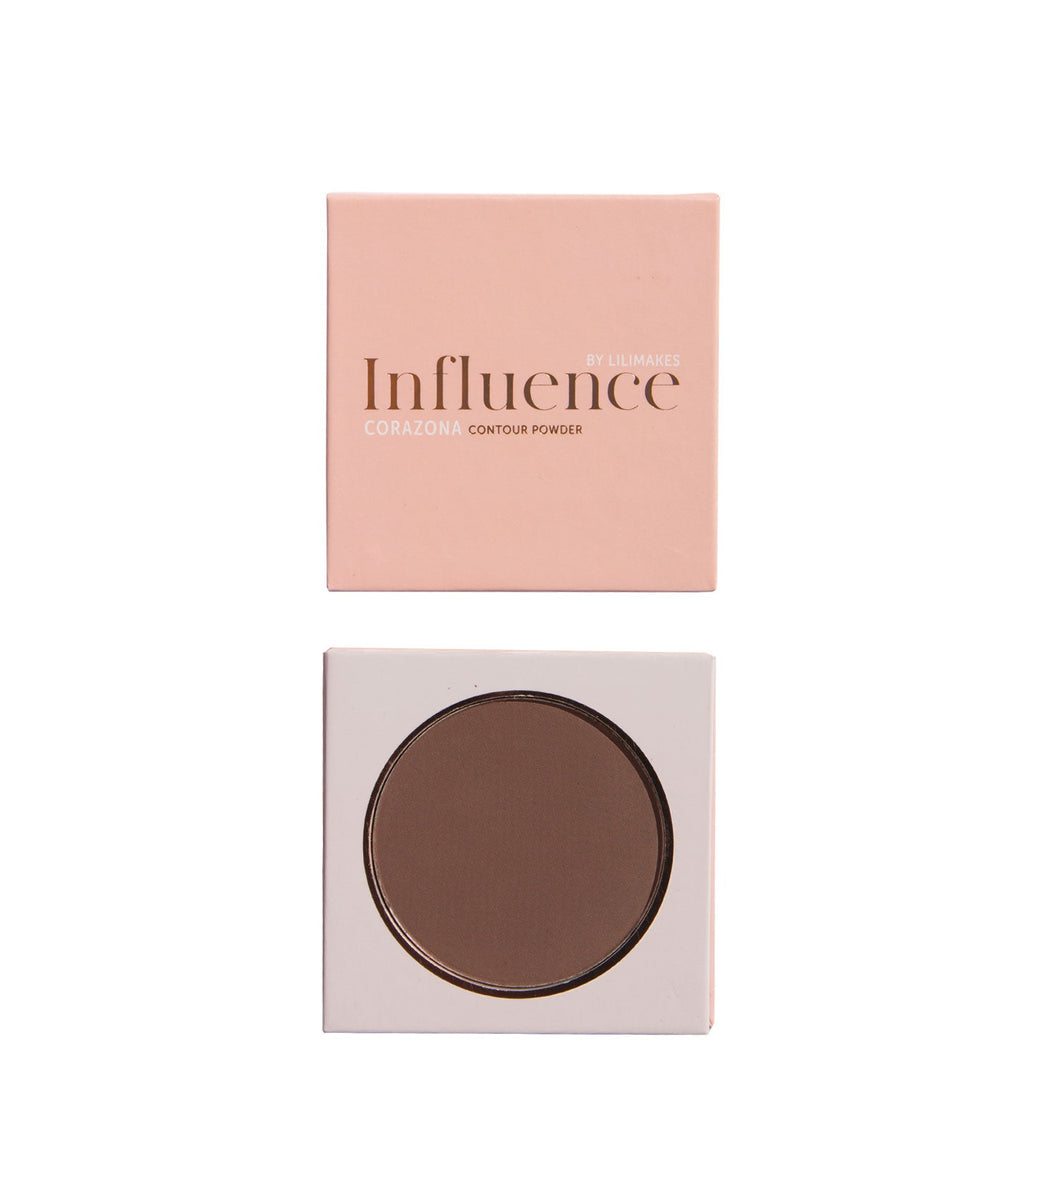 Contour powder Influence Collection by Lilimakes - CorazonaBeauty